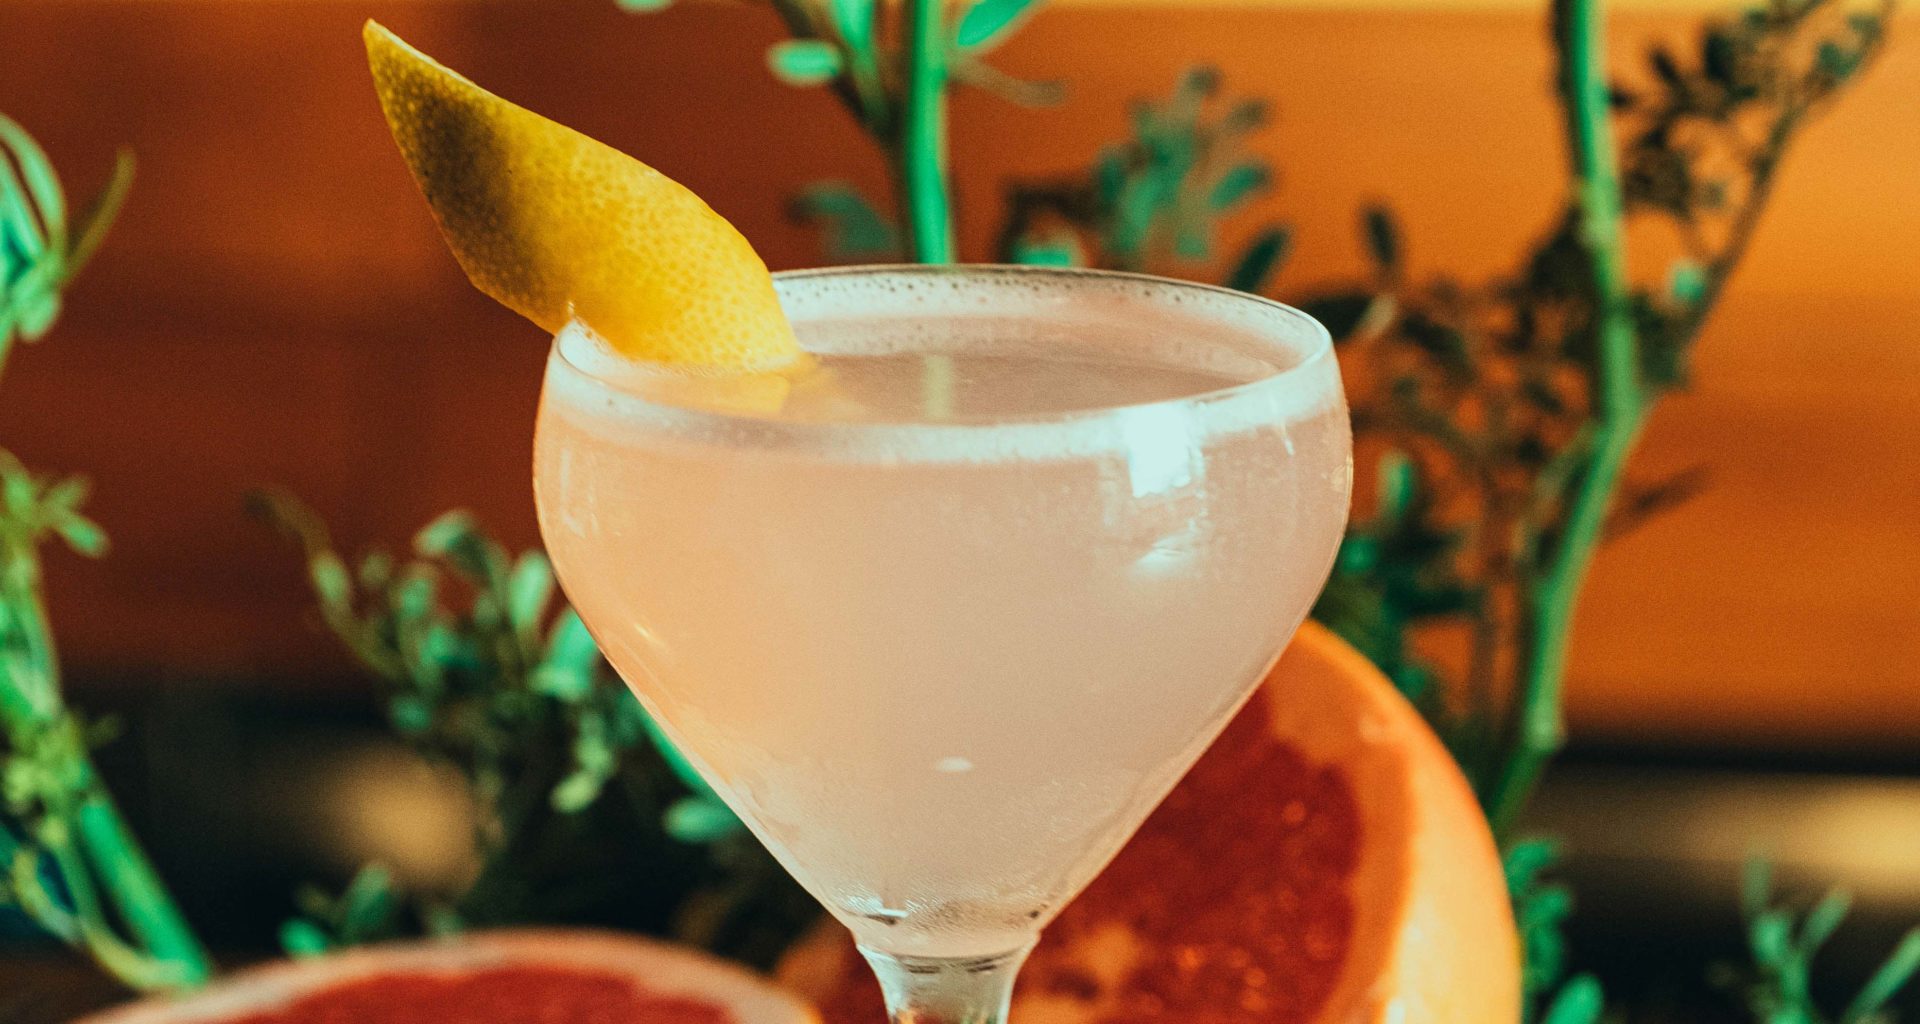 Cocktail with grapefruit peel slice with a background of plants and grapefruits